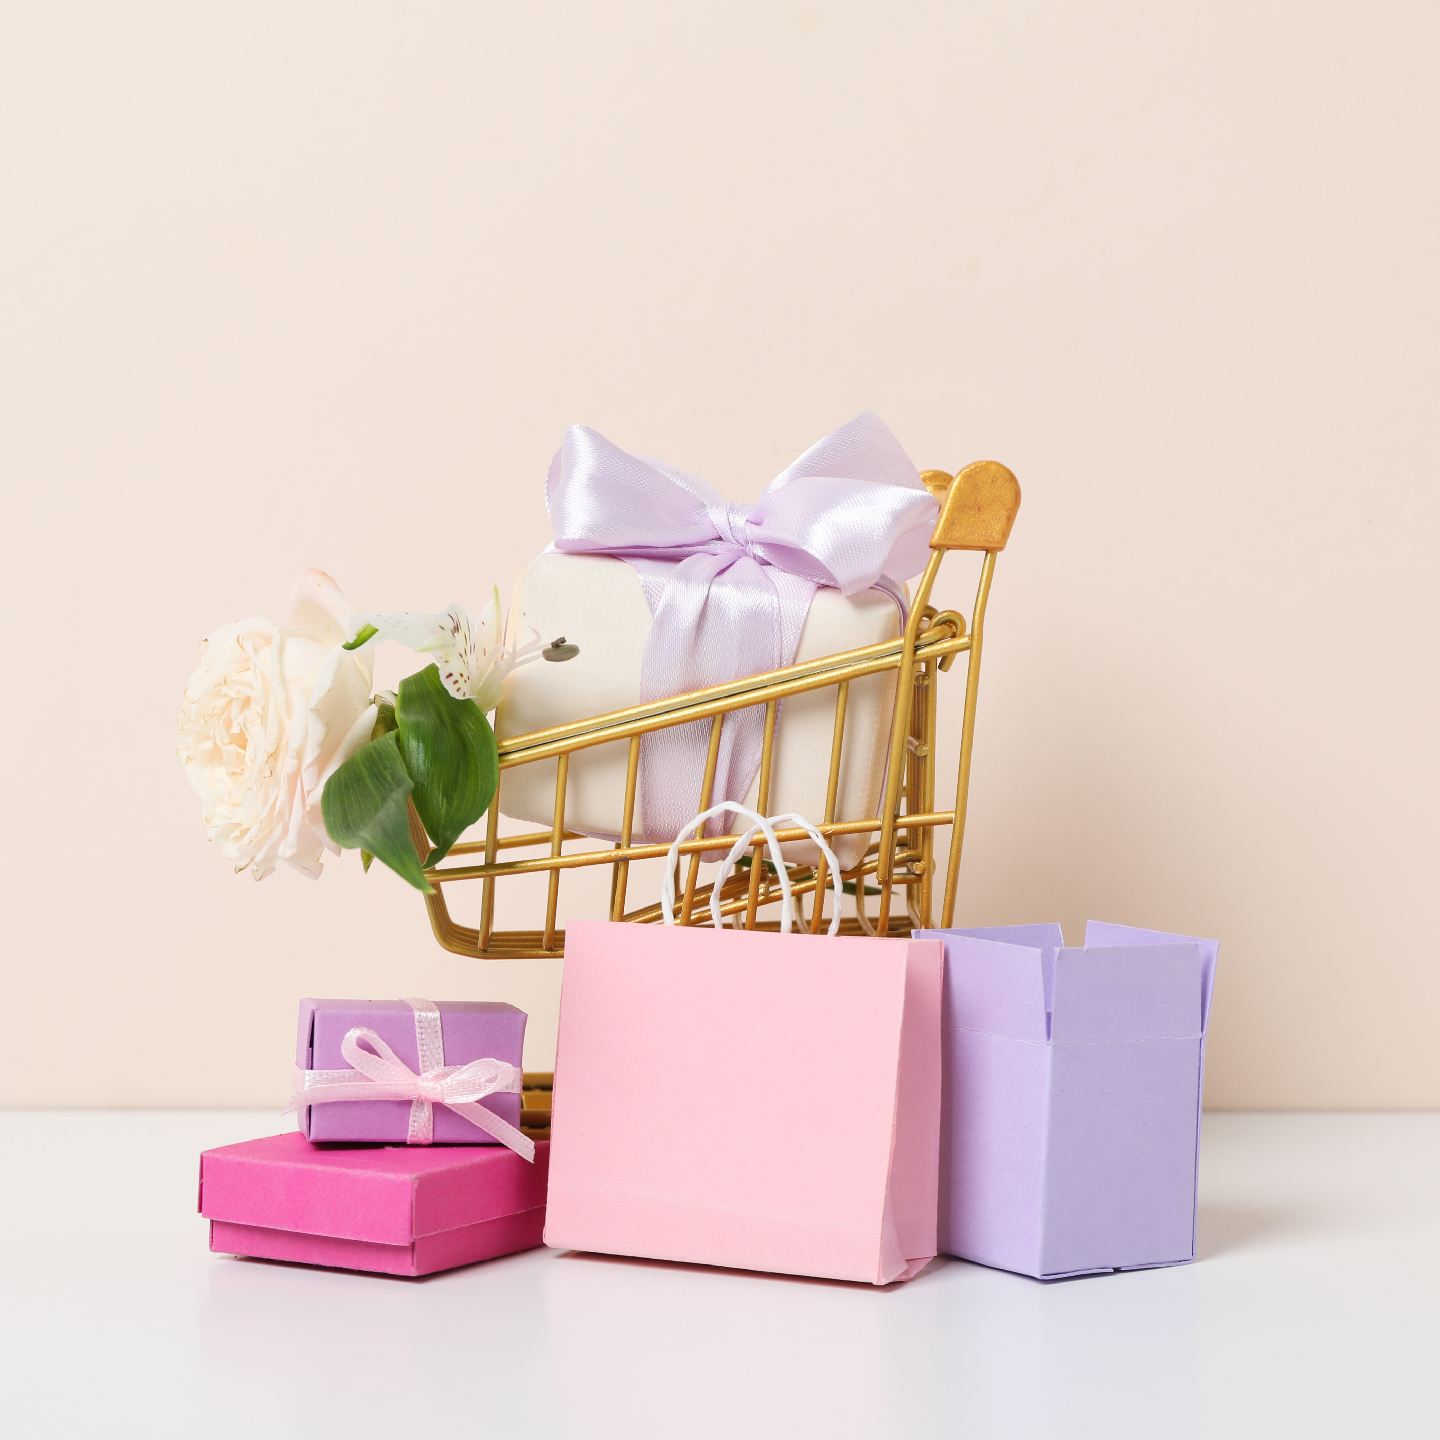 Image of a gold shopping trolley filled with wrapped gifts in pink and purple paper and bows.